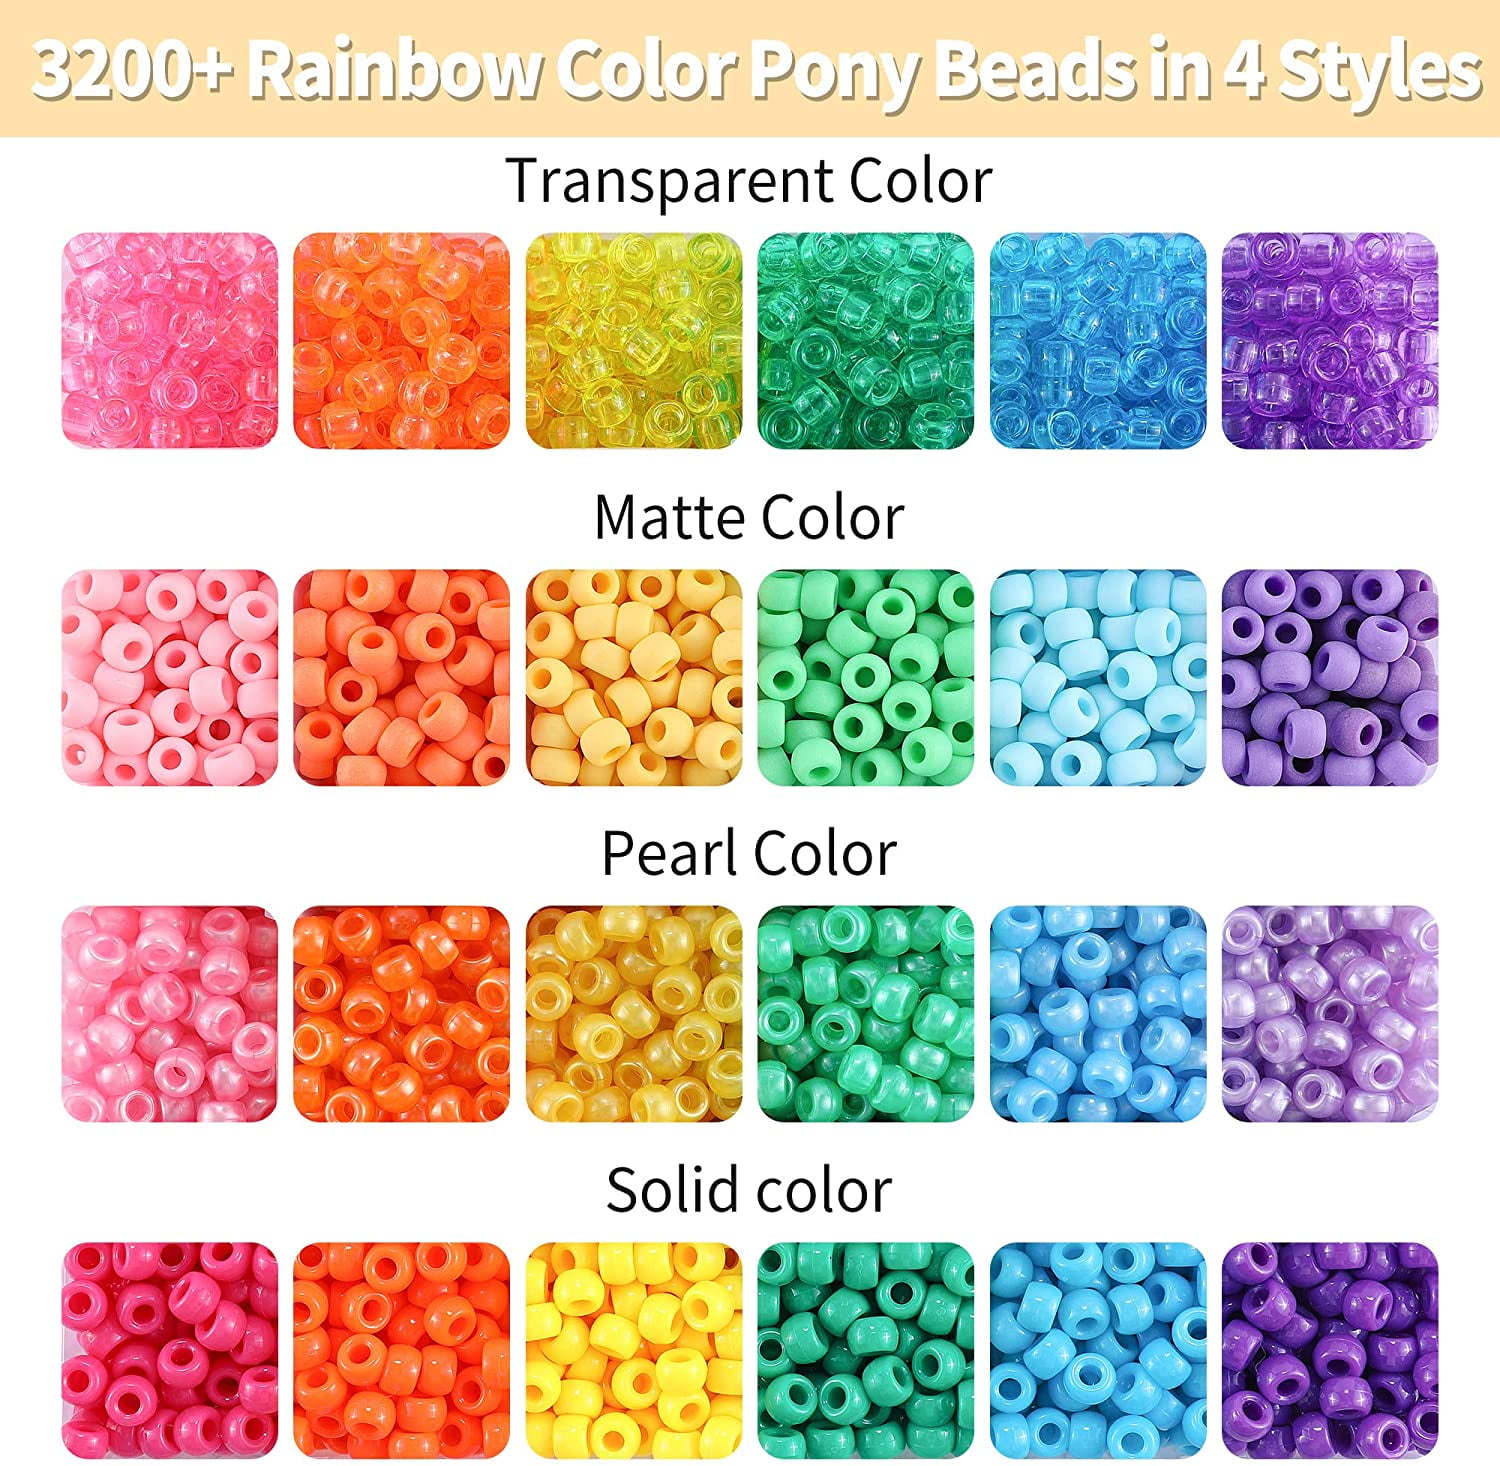  18 Color 9 mm Hair Beads for Hair Braids, Rainbow Pony Beads  Kit for Jewelry/Bracelets Making, Kandi Beads Hair Beader and Rubber Band  for School Gift